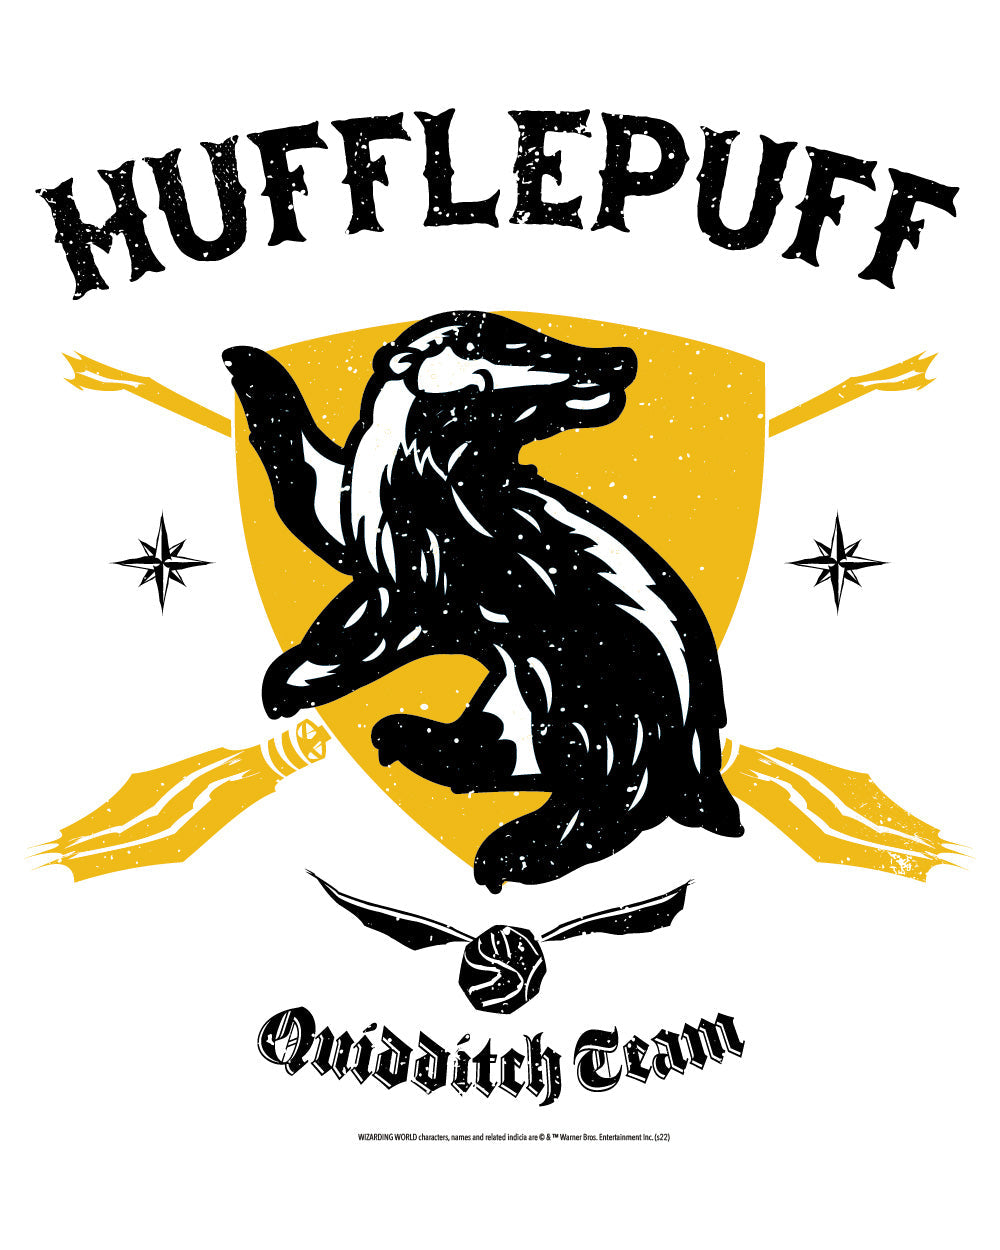 Harry Potter Hufflepuff Quidditch Team Hogwarts Witchcraft Wizardry School Officially Licensed Cotton T-Shirt